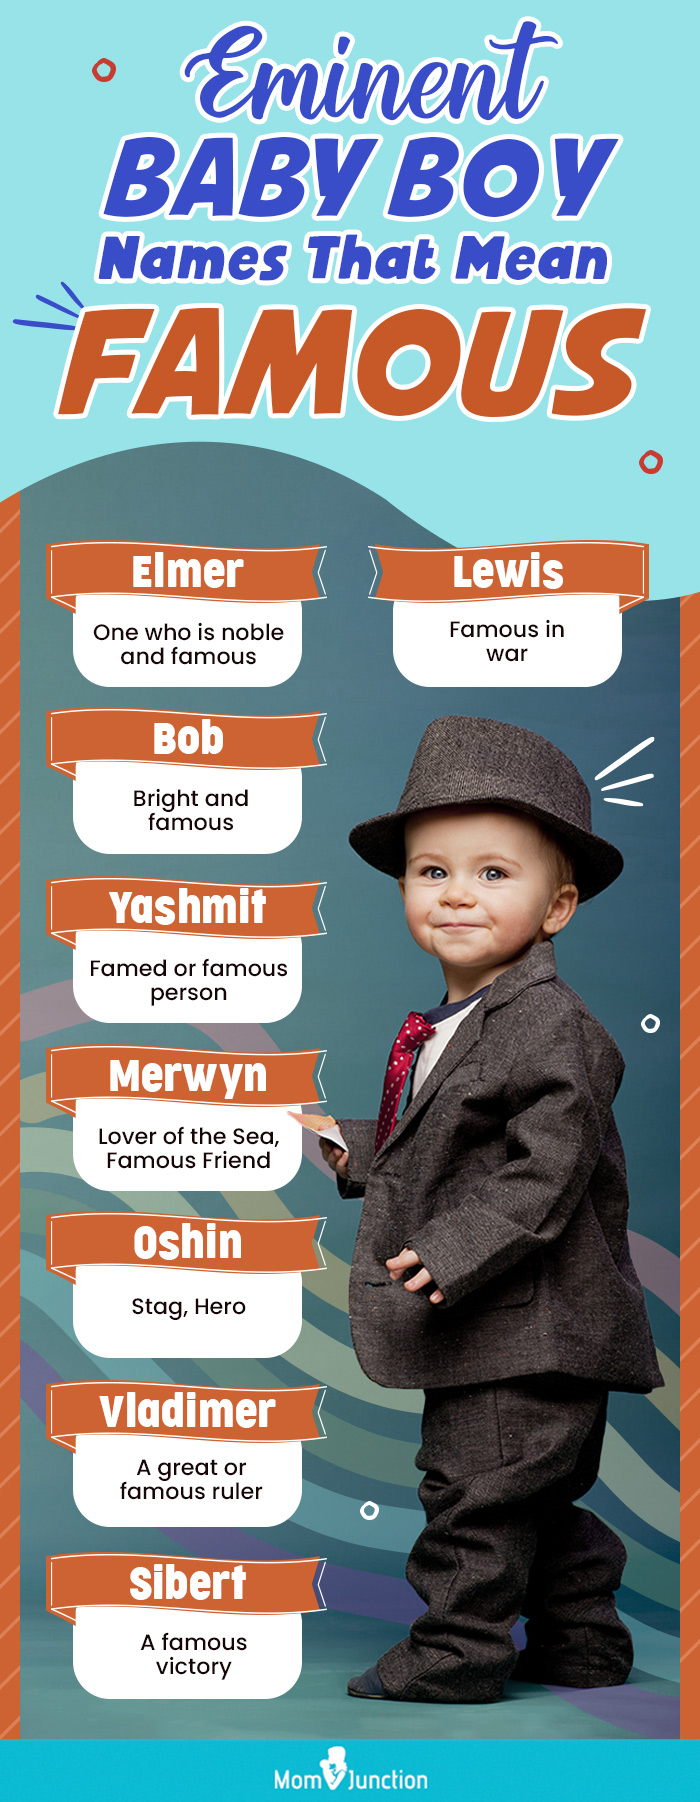 eminent baby boy names that mean famous (infographic)